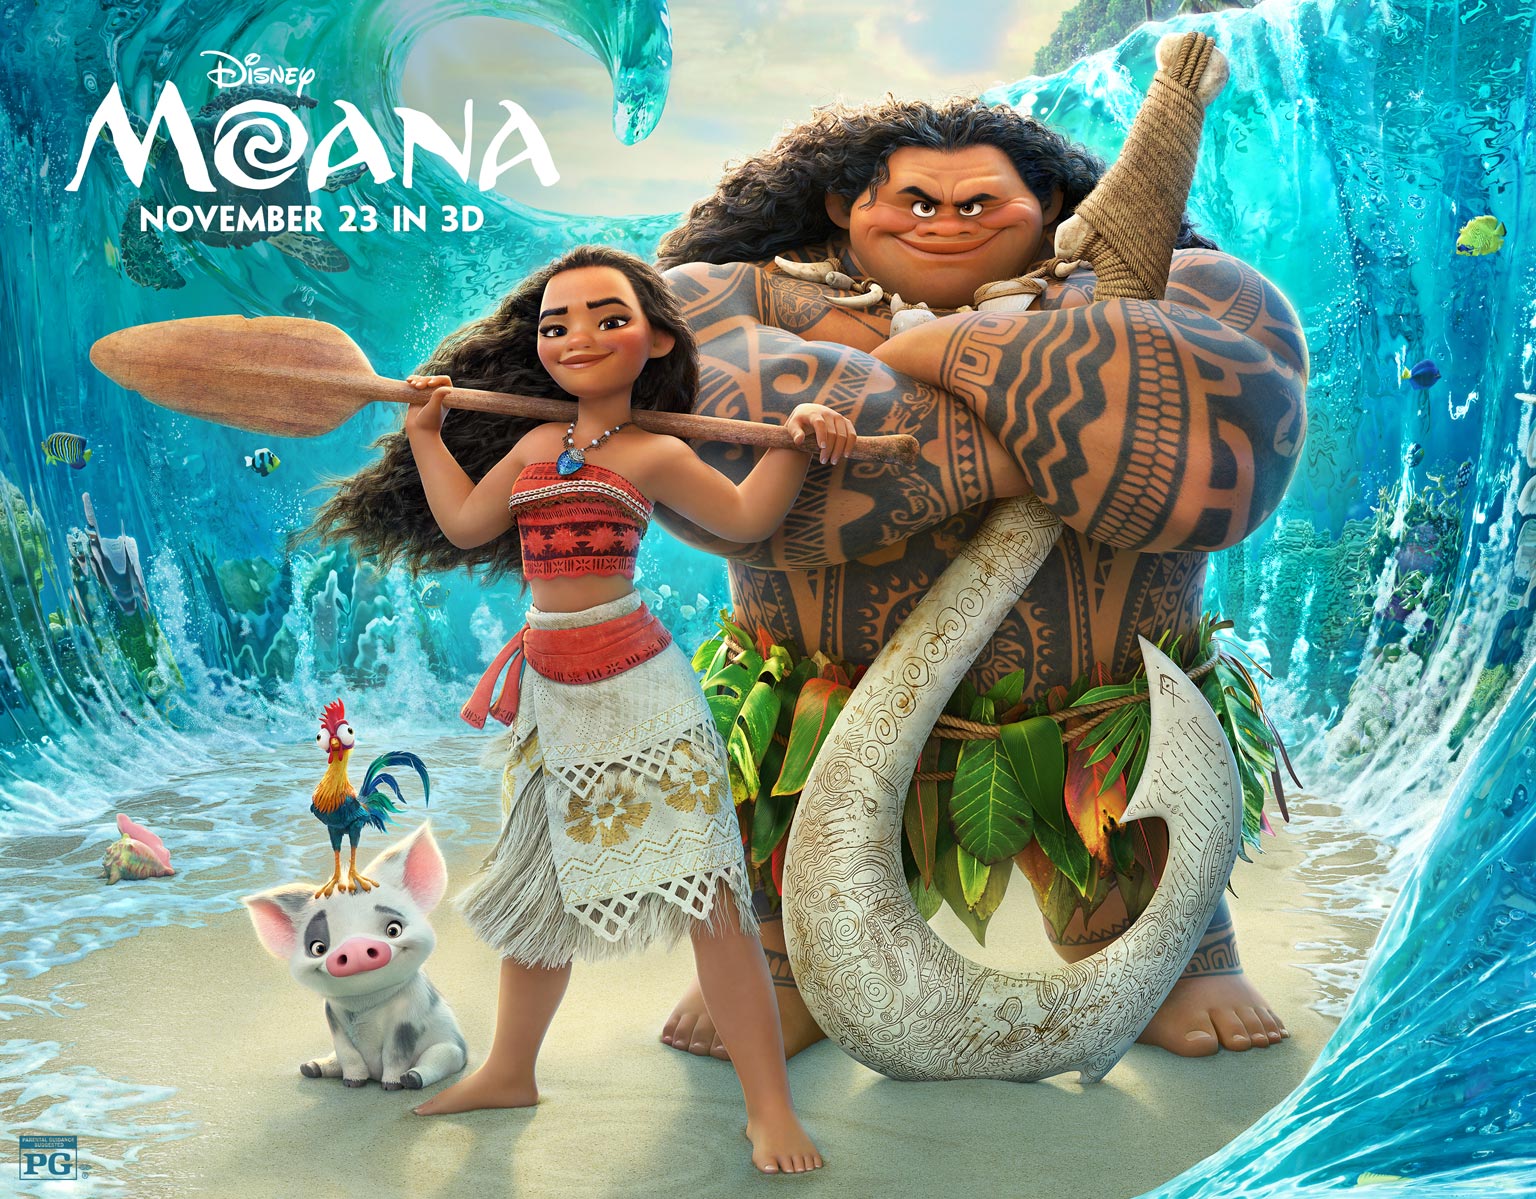 Reasons You Should Be Hyped for Disney’s ‘Moana’